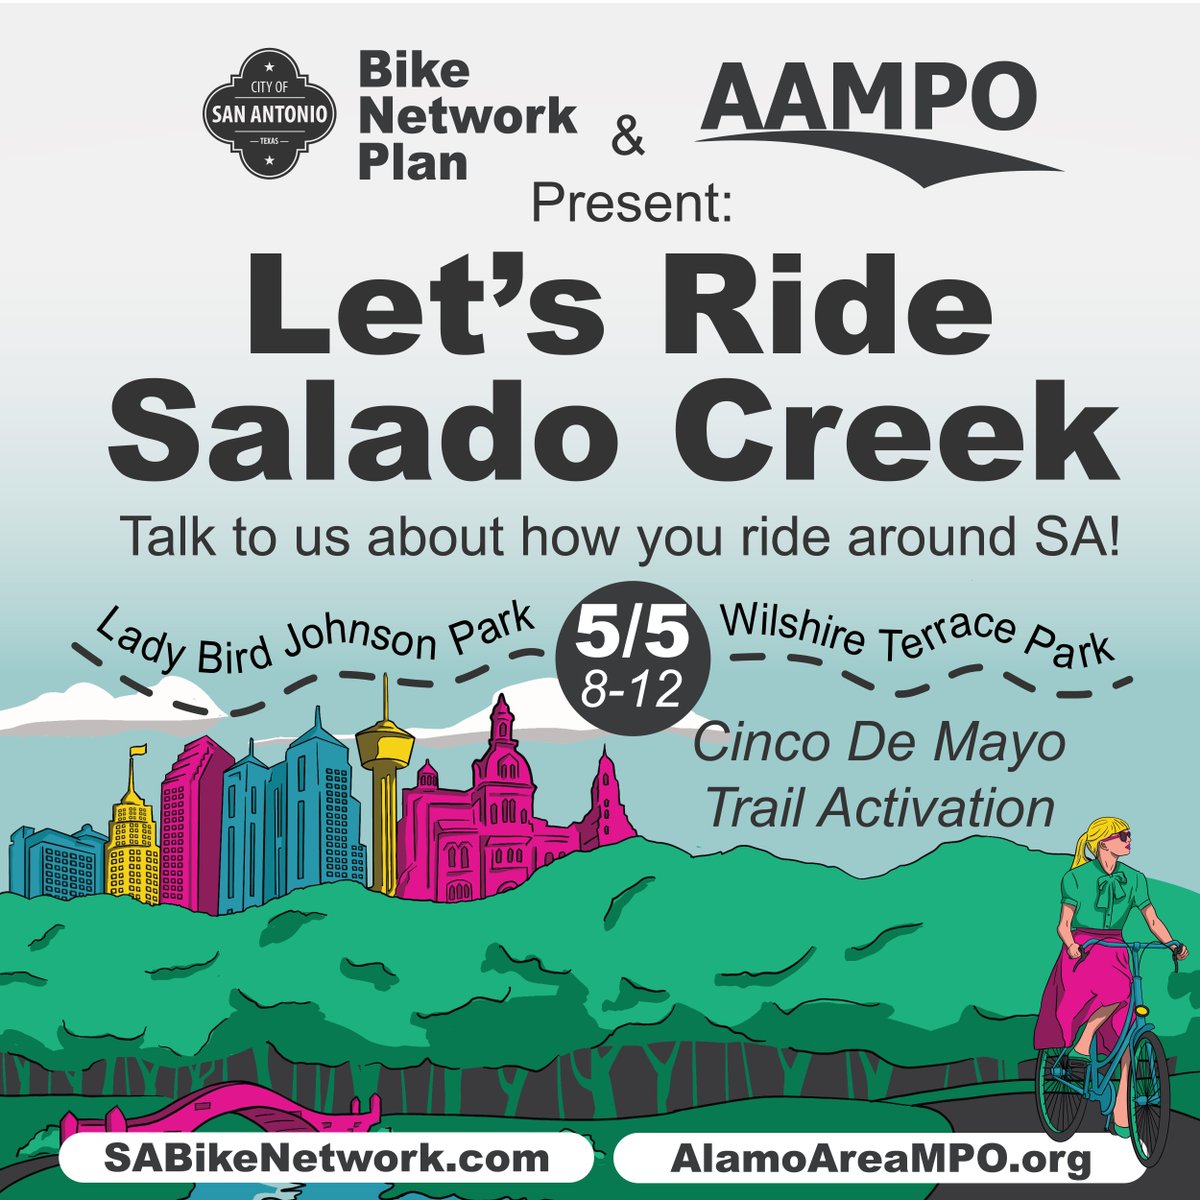 🚴‍♀️🛤️ Explore the beauty of Salado Creek Greenway and help us plan for a better biking future in San Antonio! Join us on May 5th for Let's Ride! Your ideas for new bike lanes and trails are invaluable. See you there! #LetsRideSA #COSATransportation